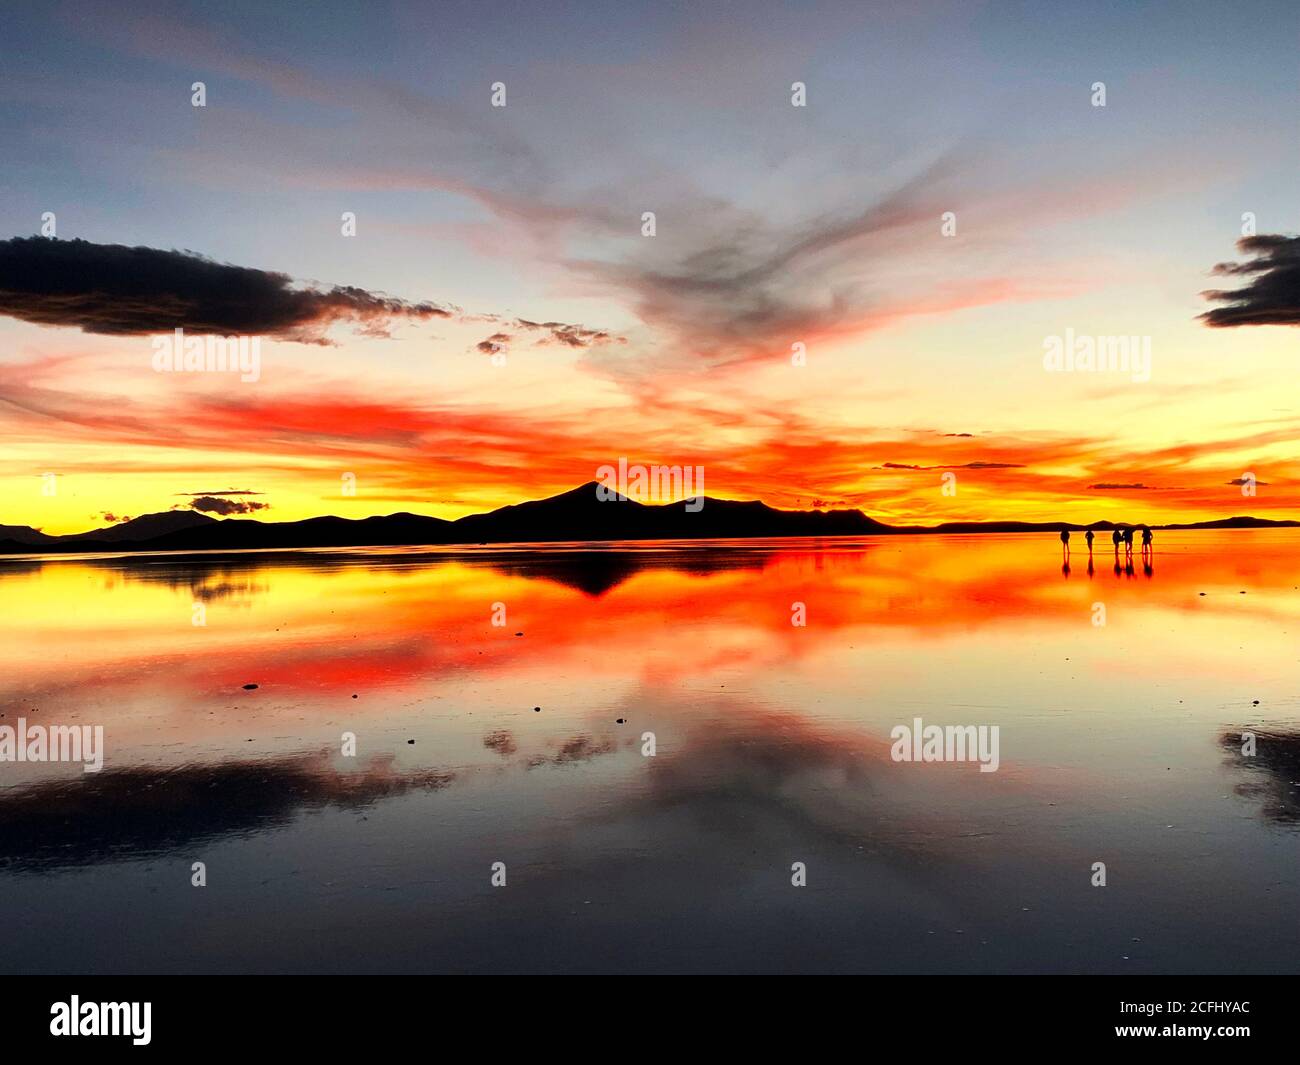 Spectacular Sunset Over Salt Flats Of Salar De Uyuni Bolivia Magical Sky Reflection In The Water Impressive Wilderness Nature Of South America 2CFHYAC 